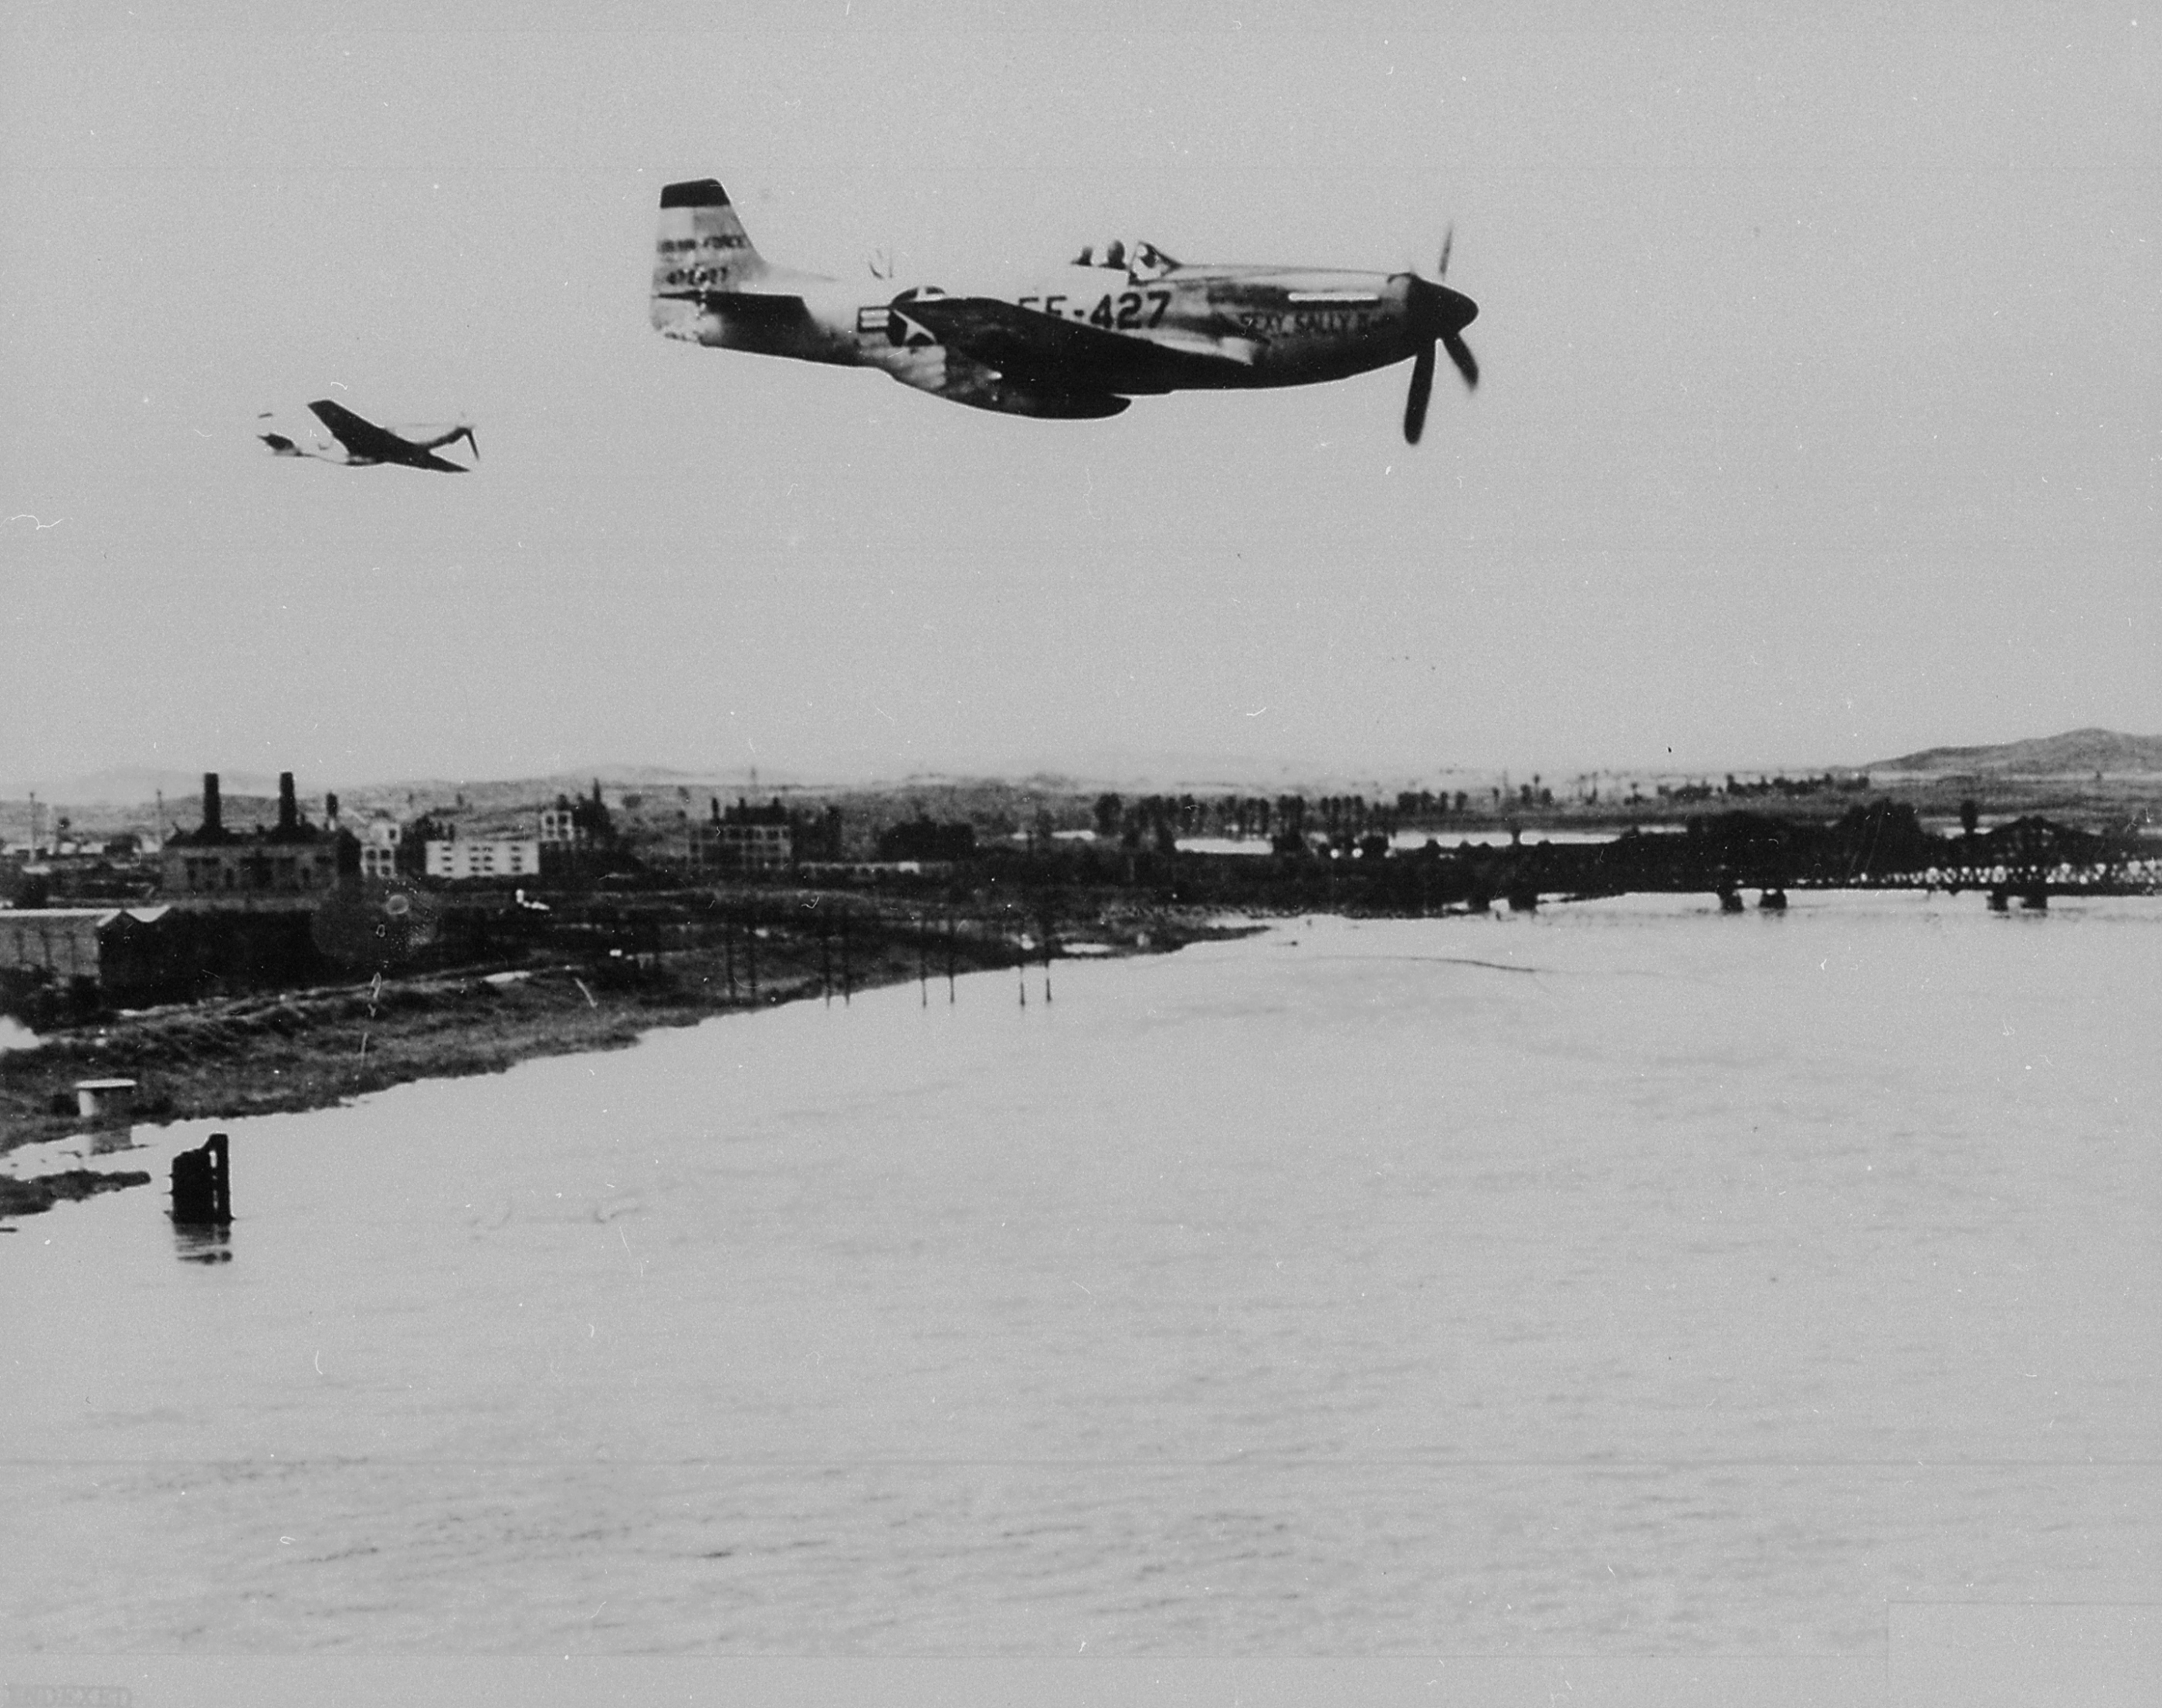 F-51 Mustang fighters of US 18th Fighter Bomber Wing crossing over a river in North Korea, Aug 1951